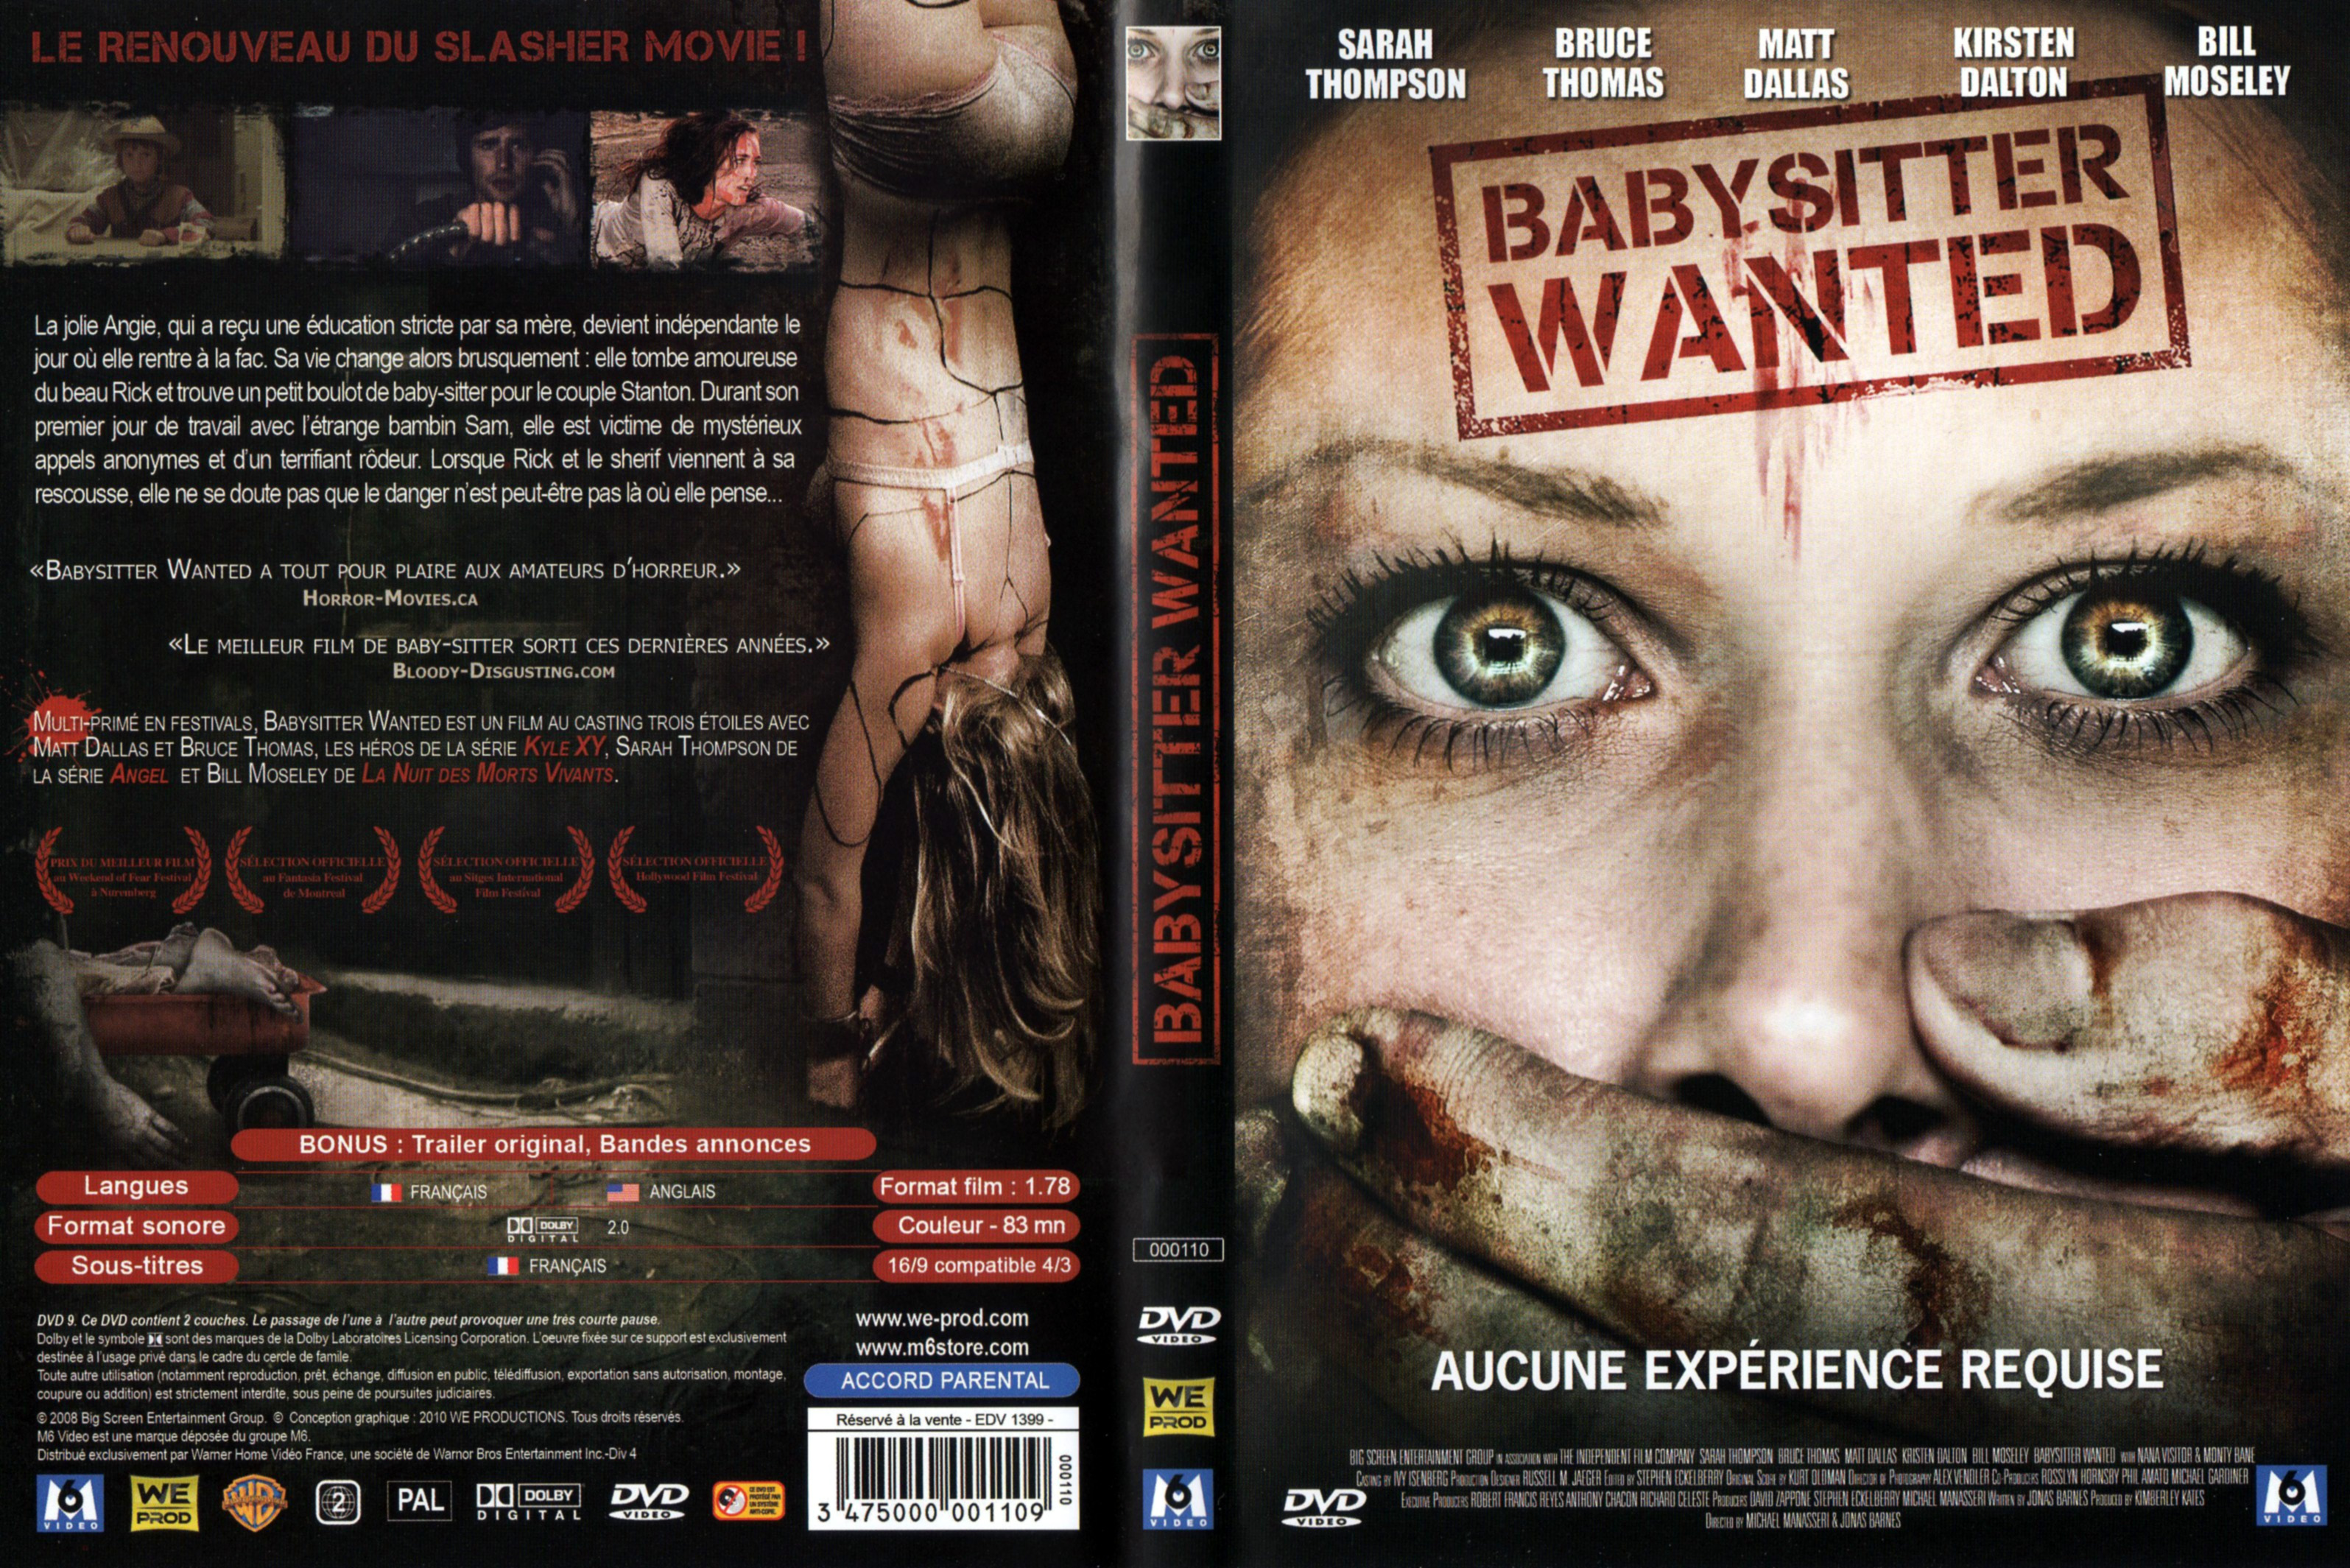 Jaquette DVD Baby sitter wanted